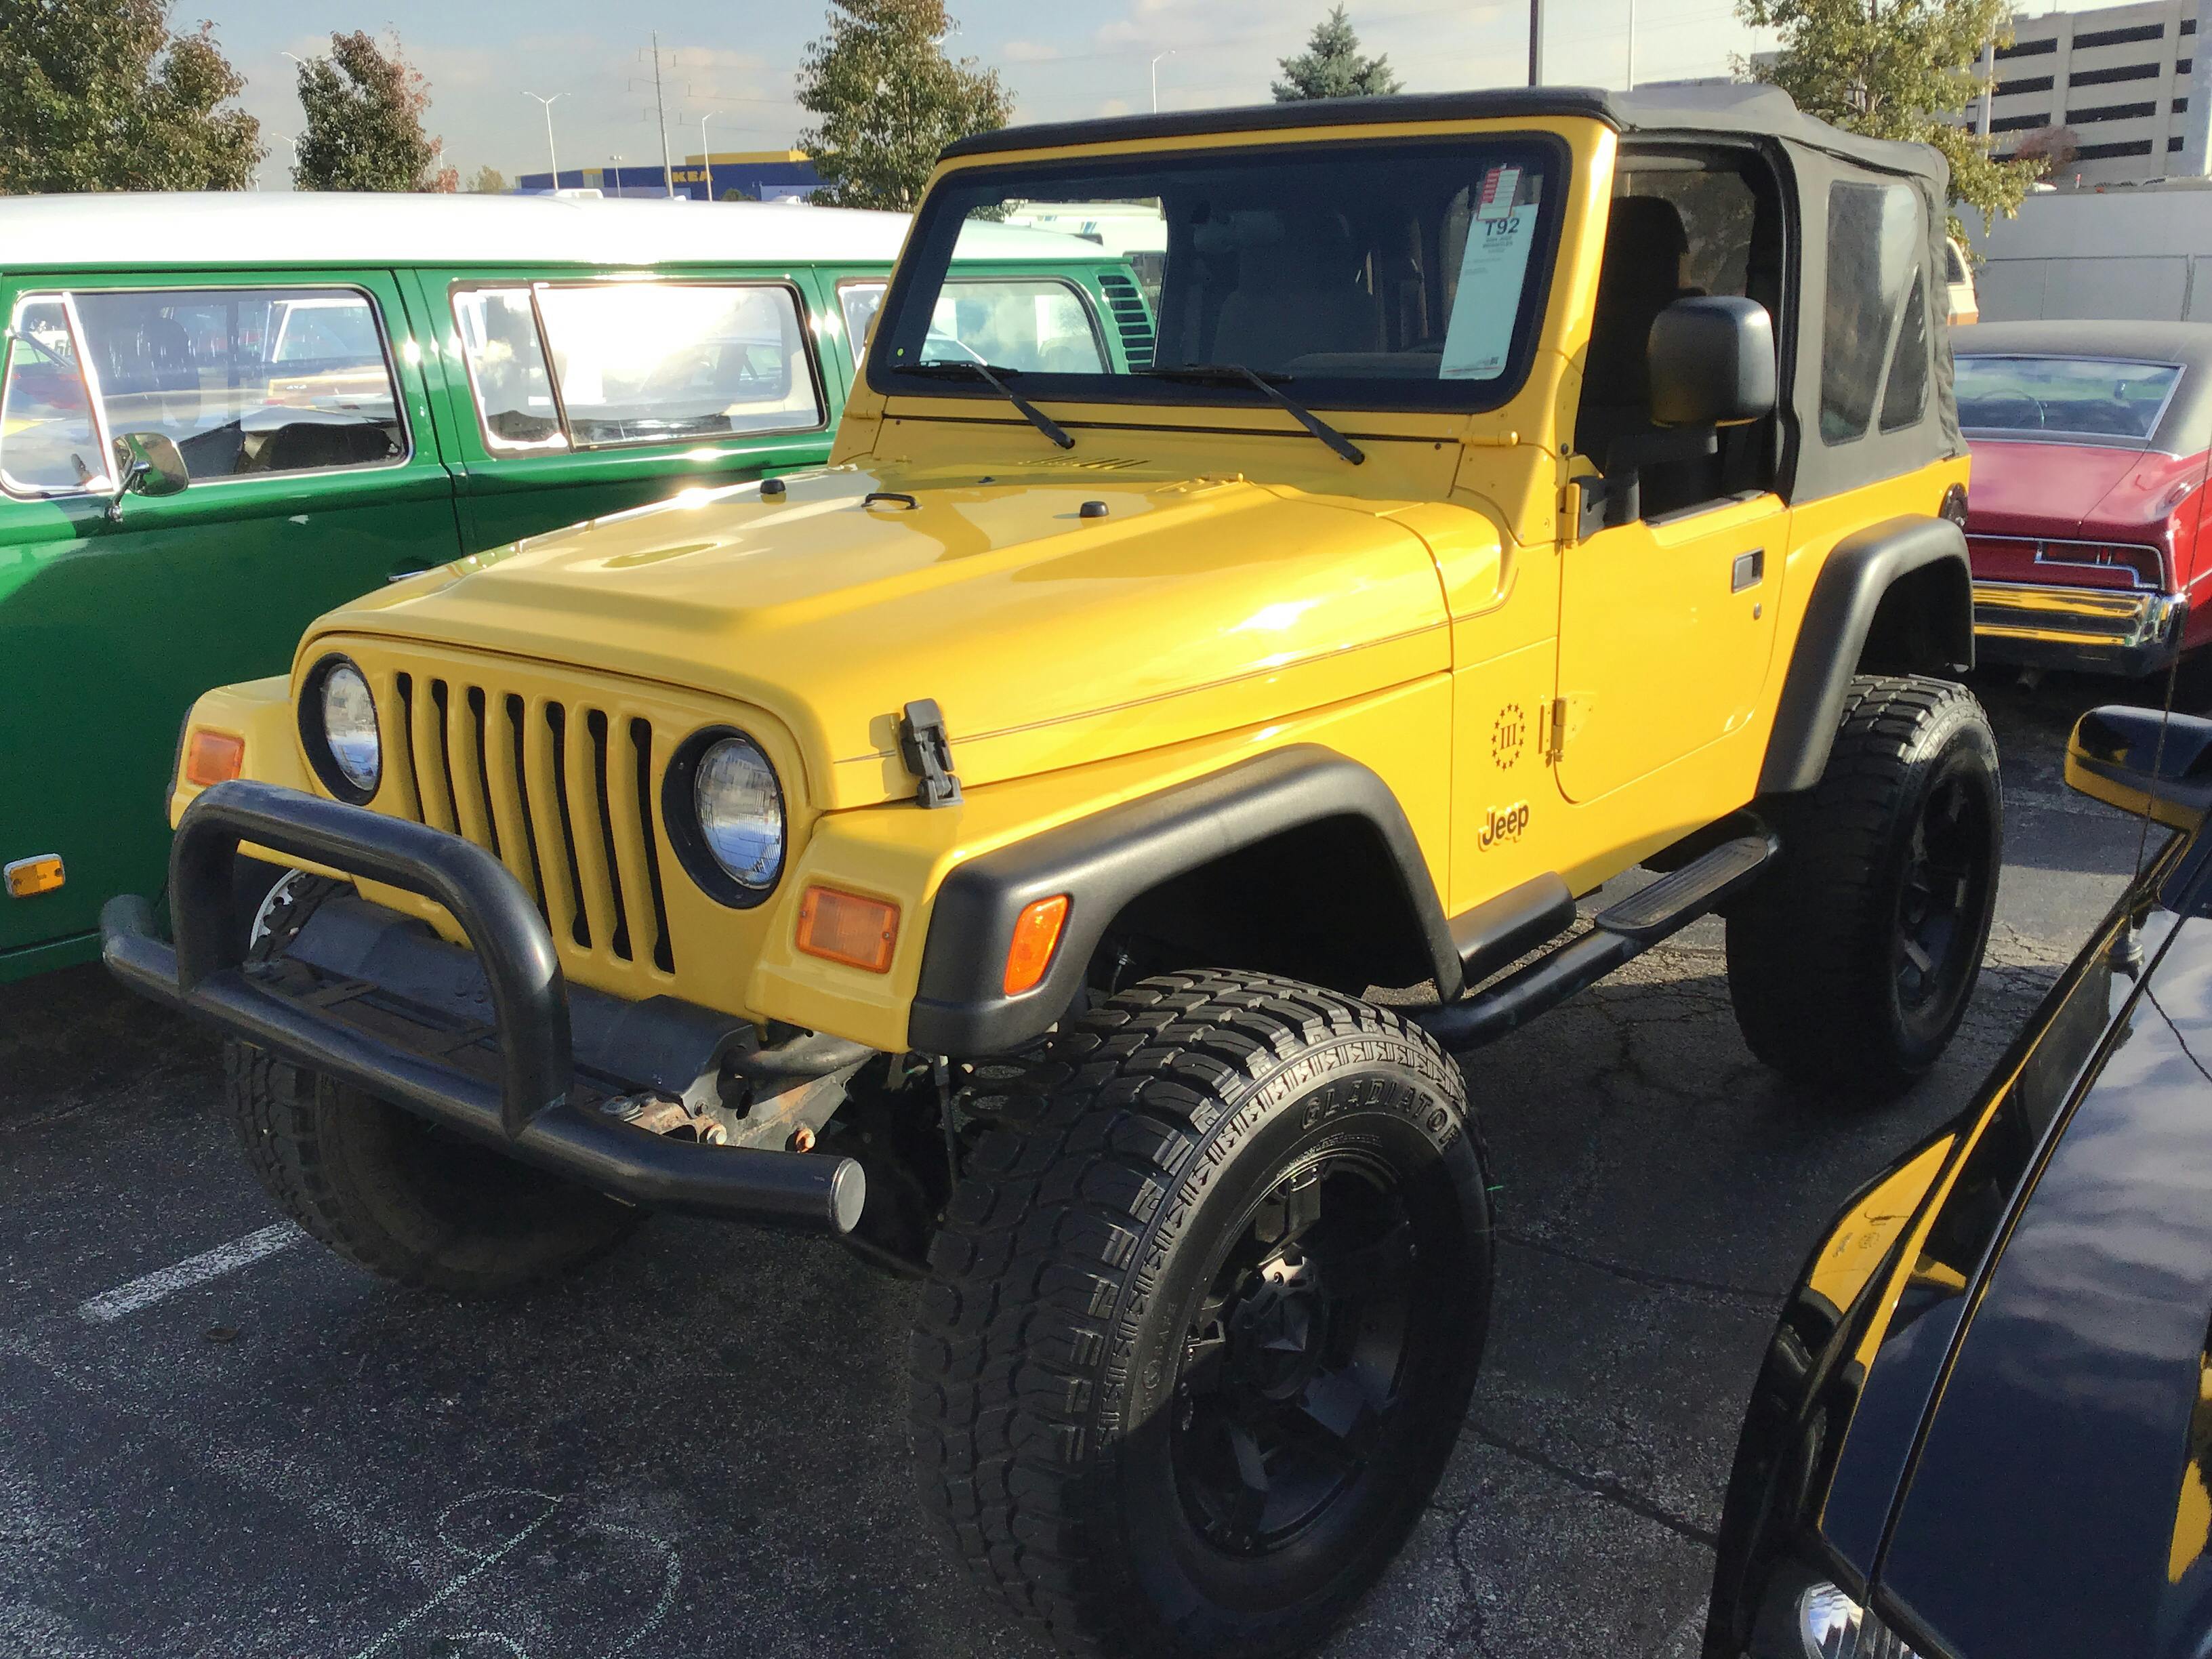 1998 Jeep Wrangler SE | Hagerty Valuation Tools